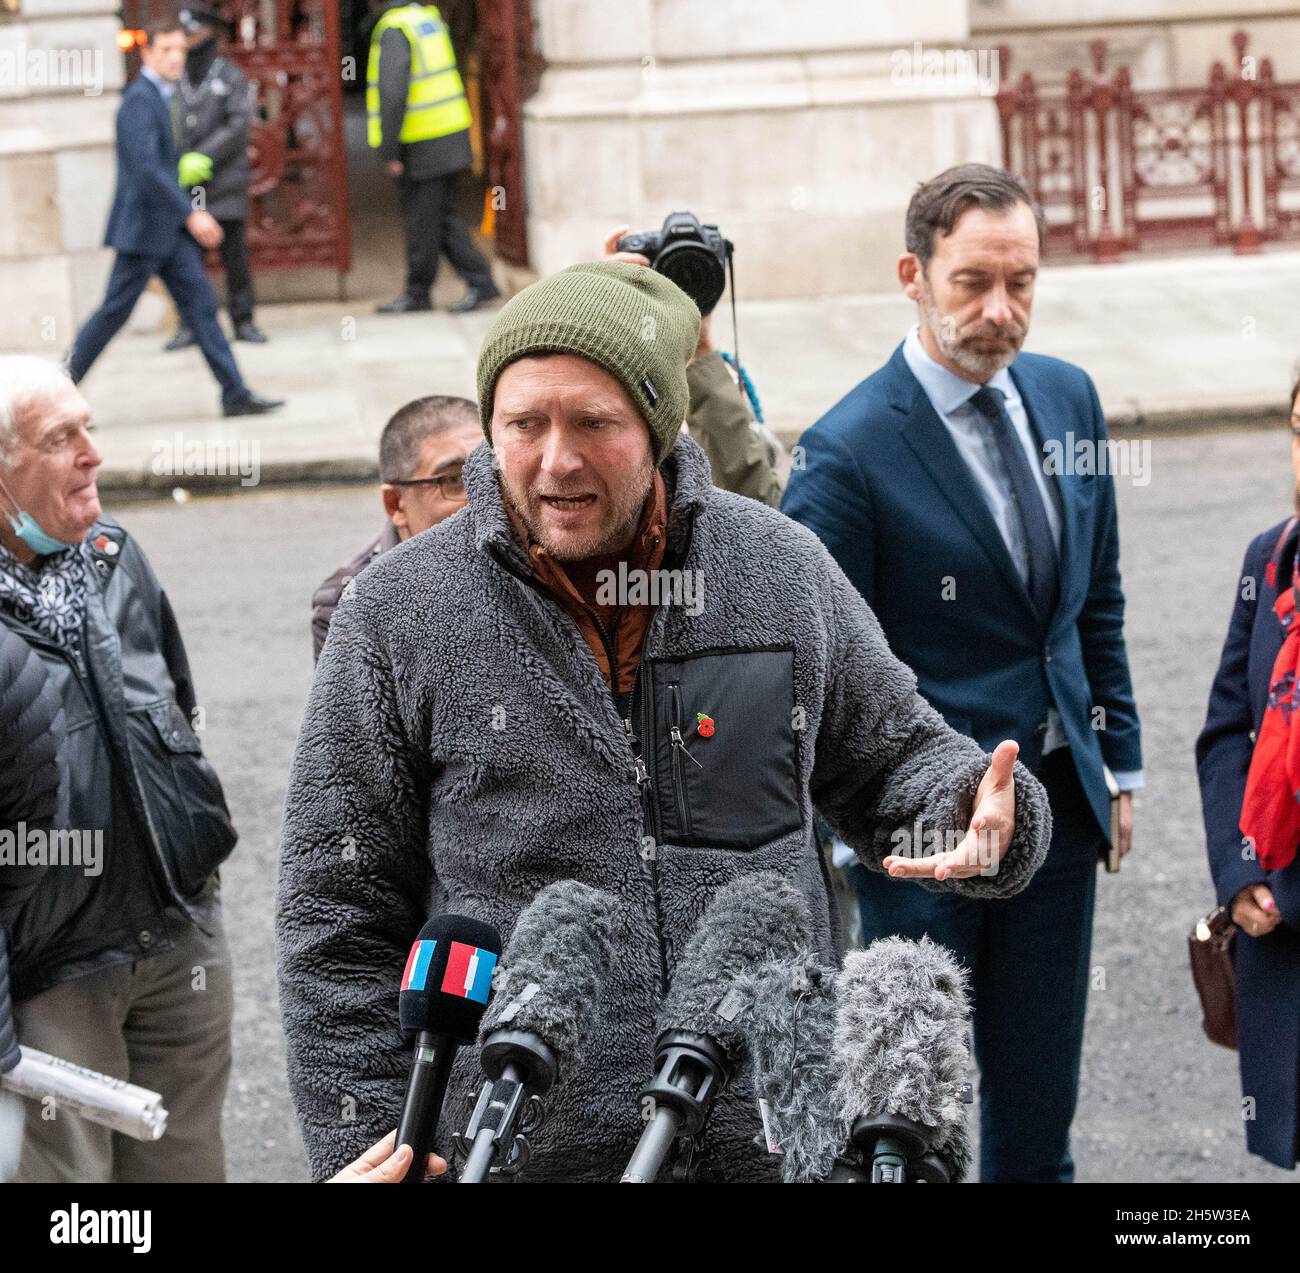 London, UK. 11th Nov, 2021. Richard Ratcliffe talks to the media following his meeting at the Foreign Commonwealth and development office in Whitehall London UK, Credit: Ian Davidson/Alamy Live News Stock Photo